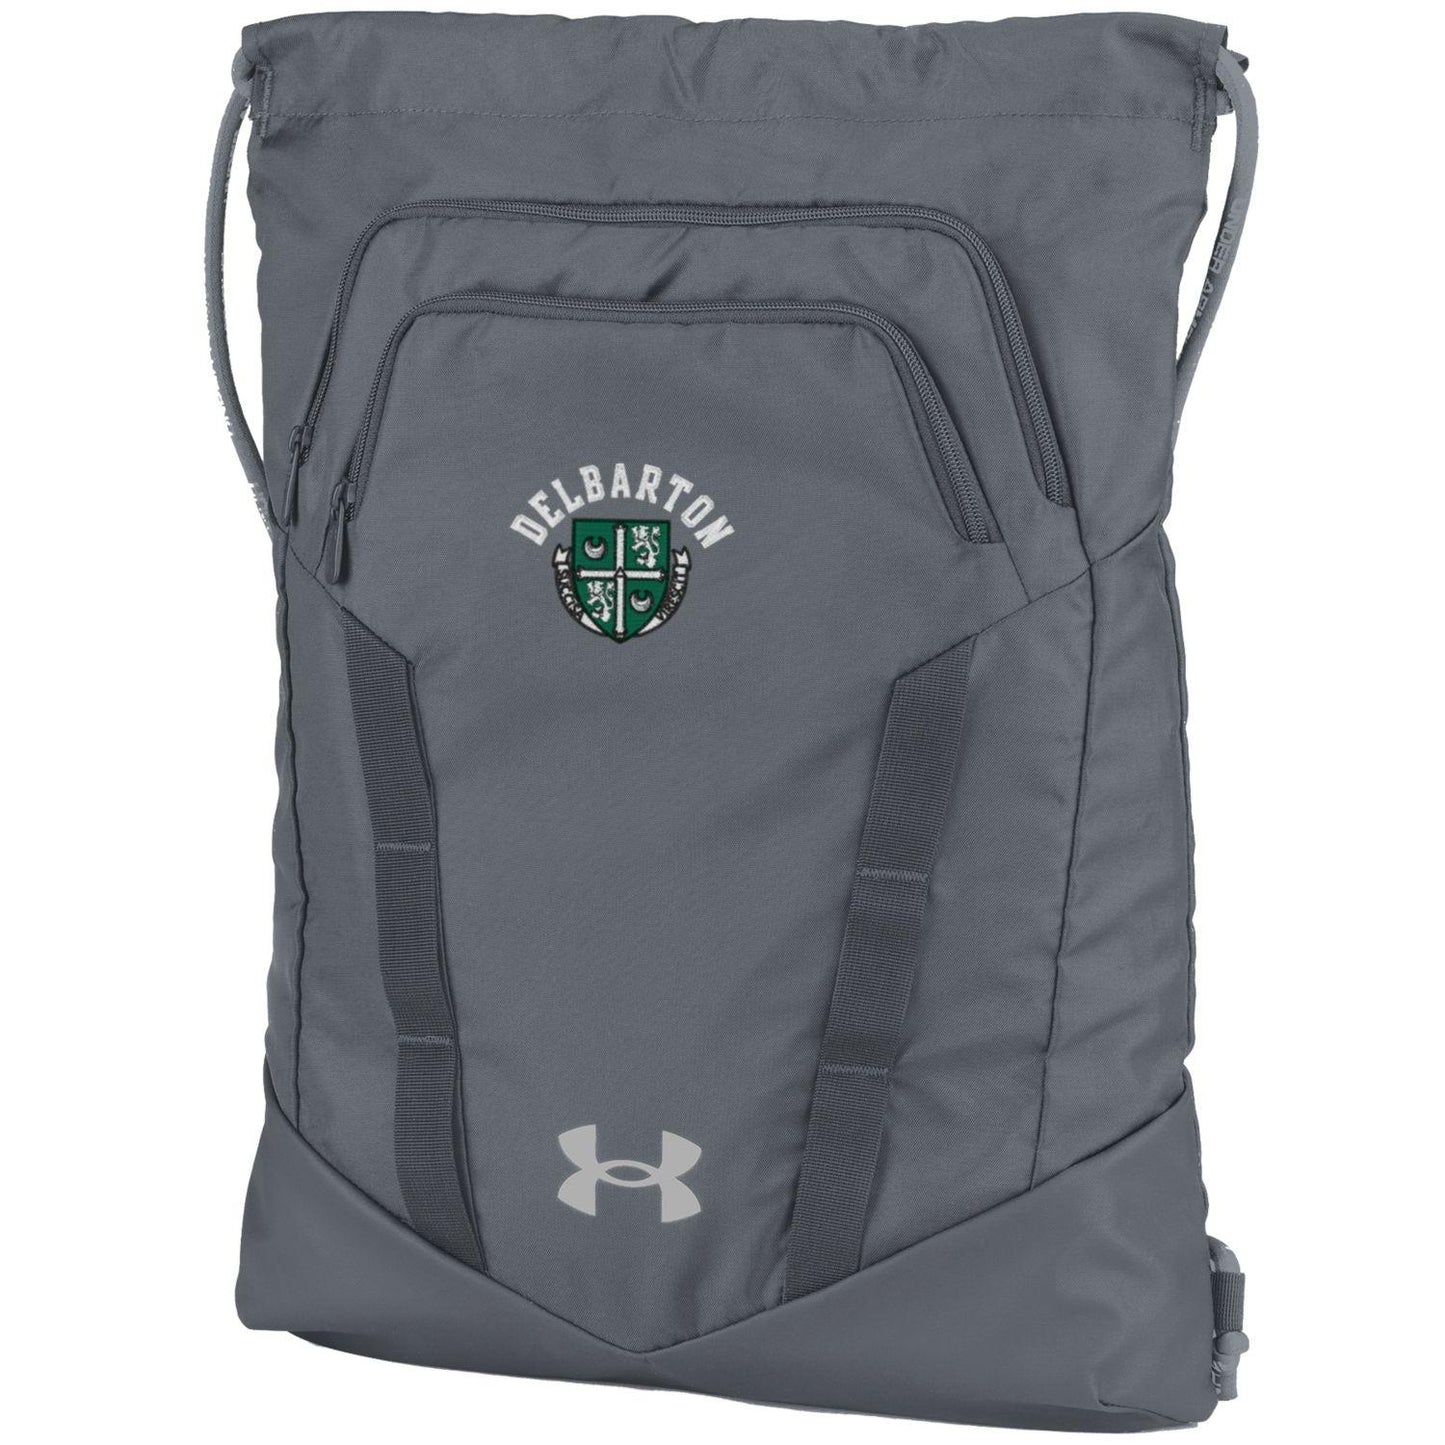 Sack Pack - UA Undeniable Sack Pack - Pitch Grey